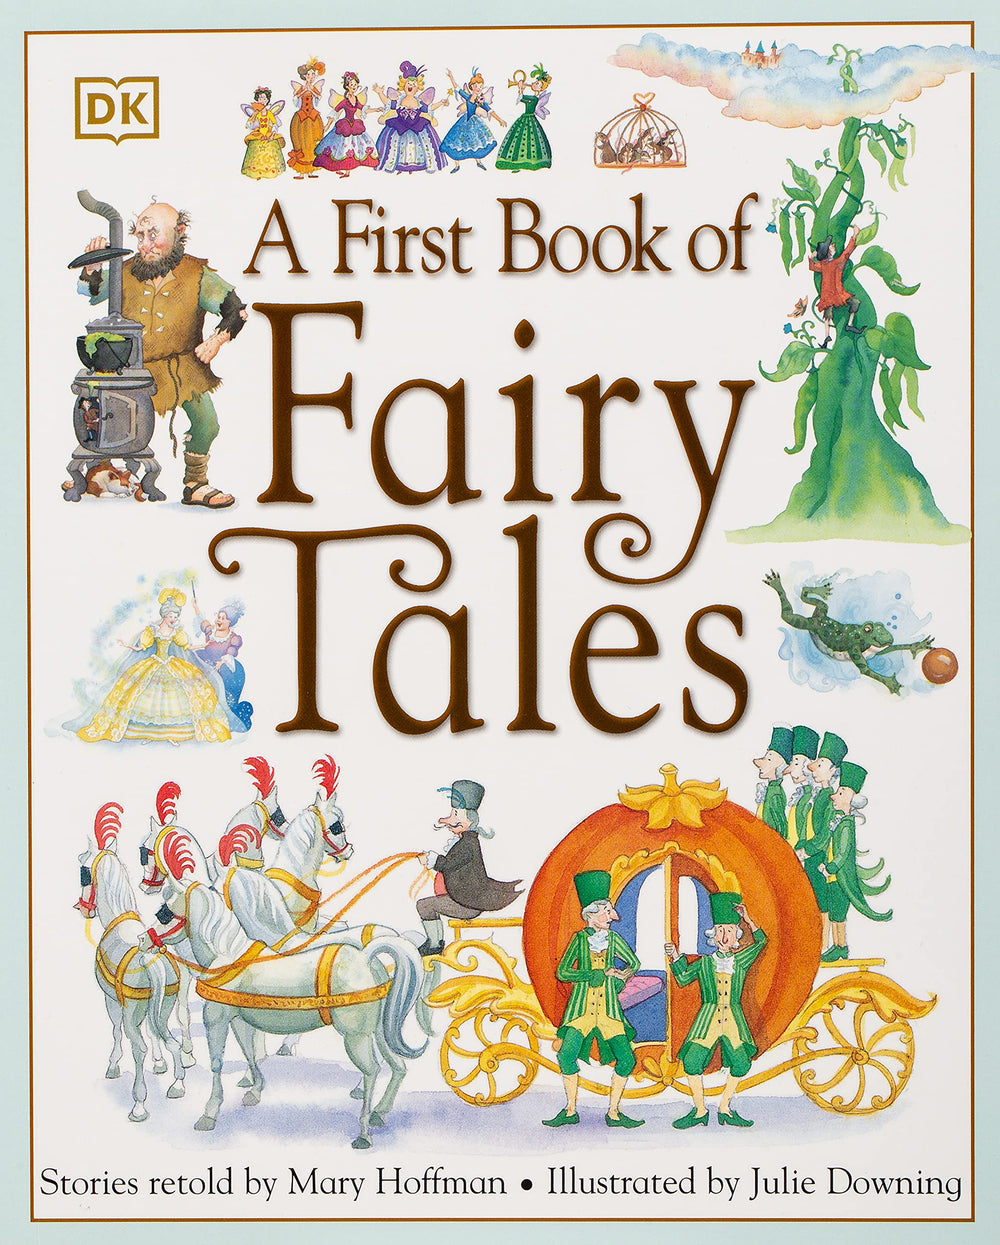 A First book of fairy tales